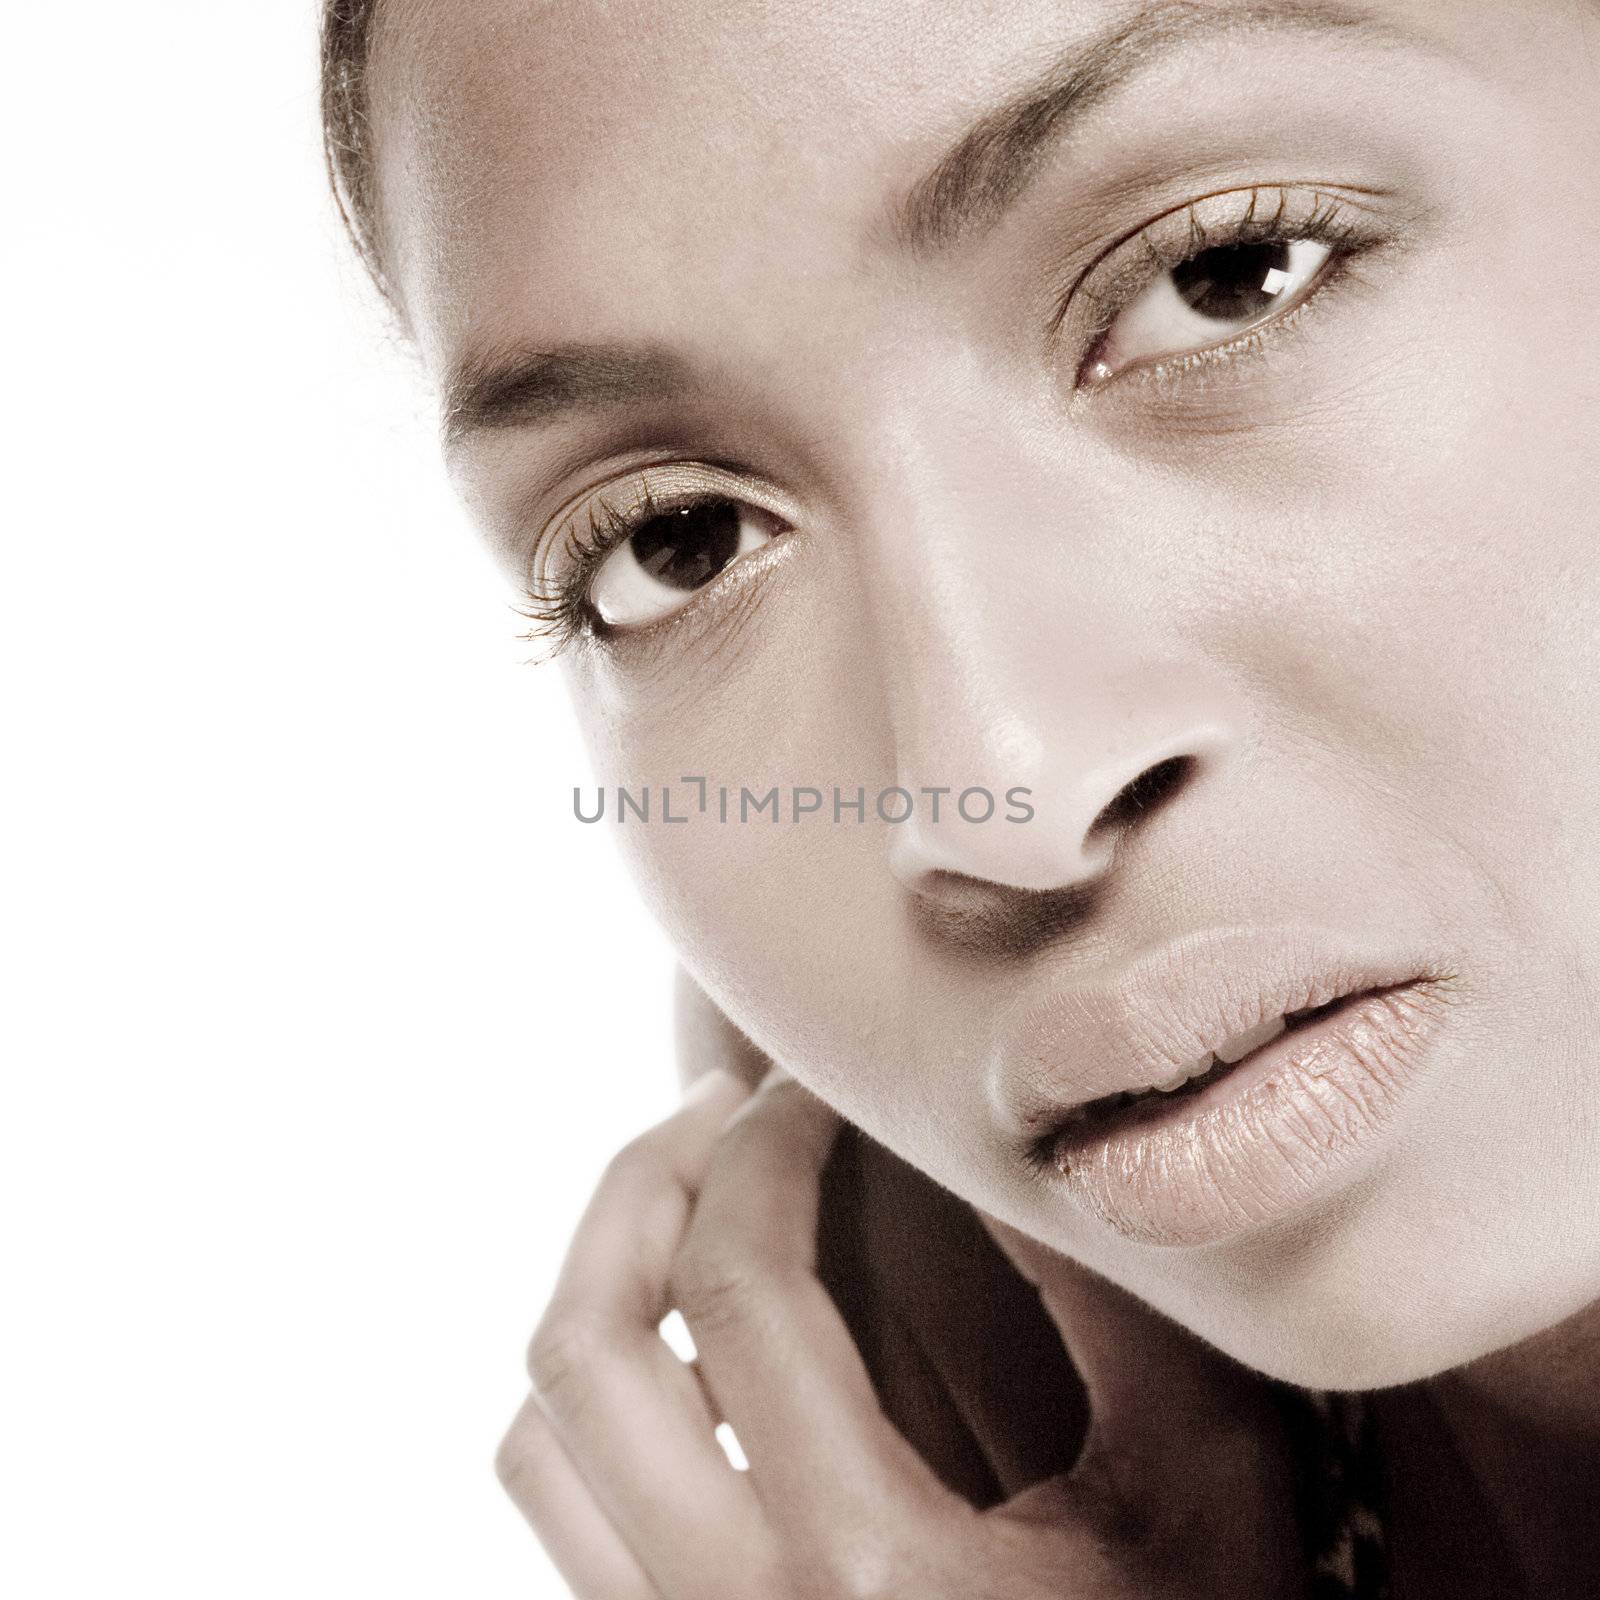 A beauty portrait taken from an african model in the studio with a serious look